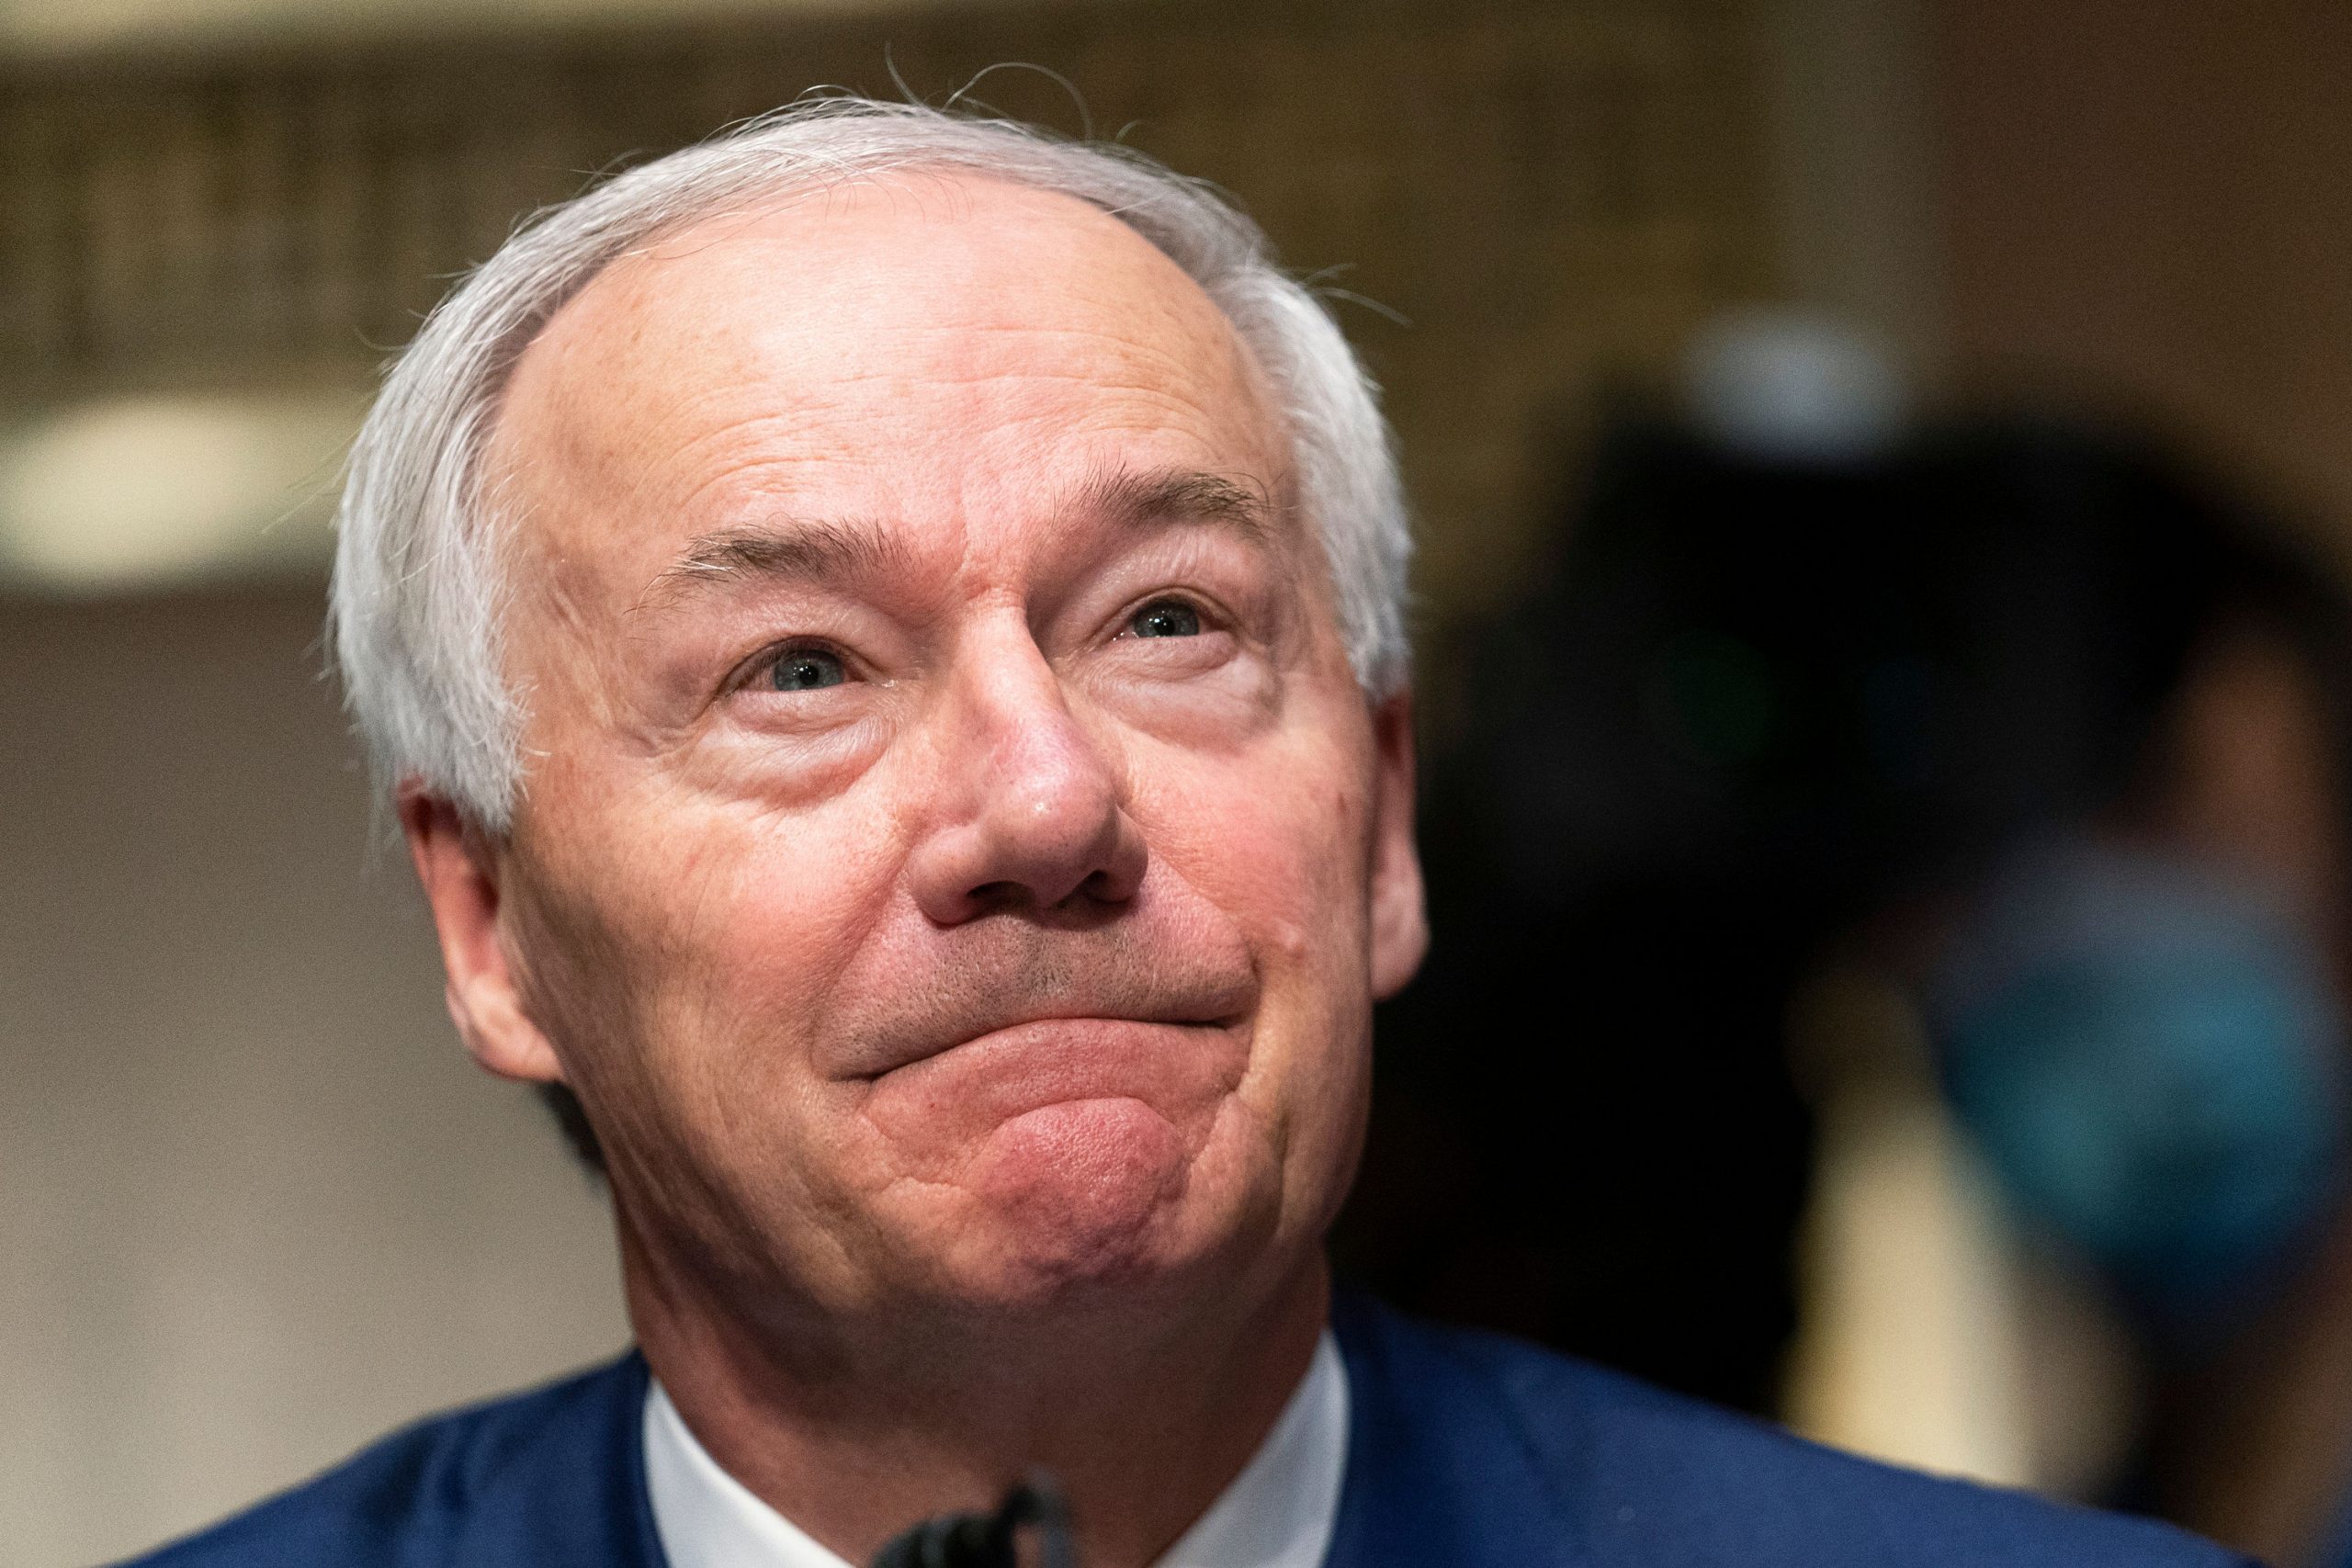 Arkansas Governor Asa Hutchinson eyes White House in 2024 without Donald Trump’s backing